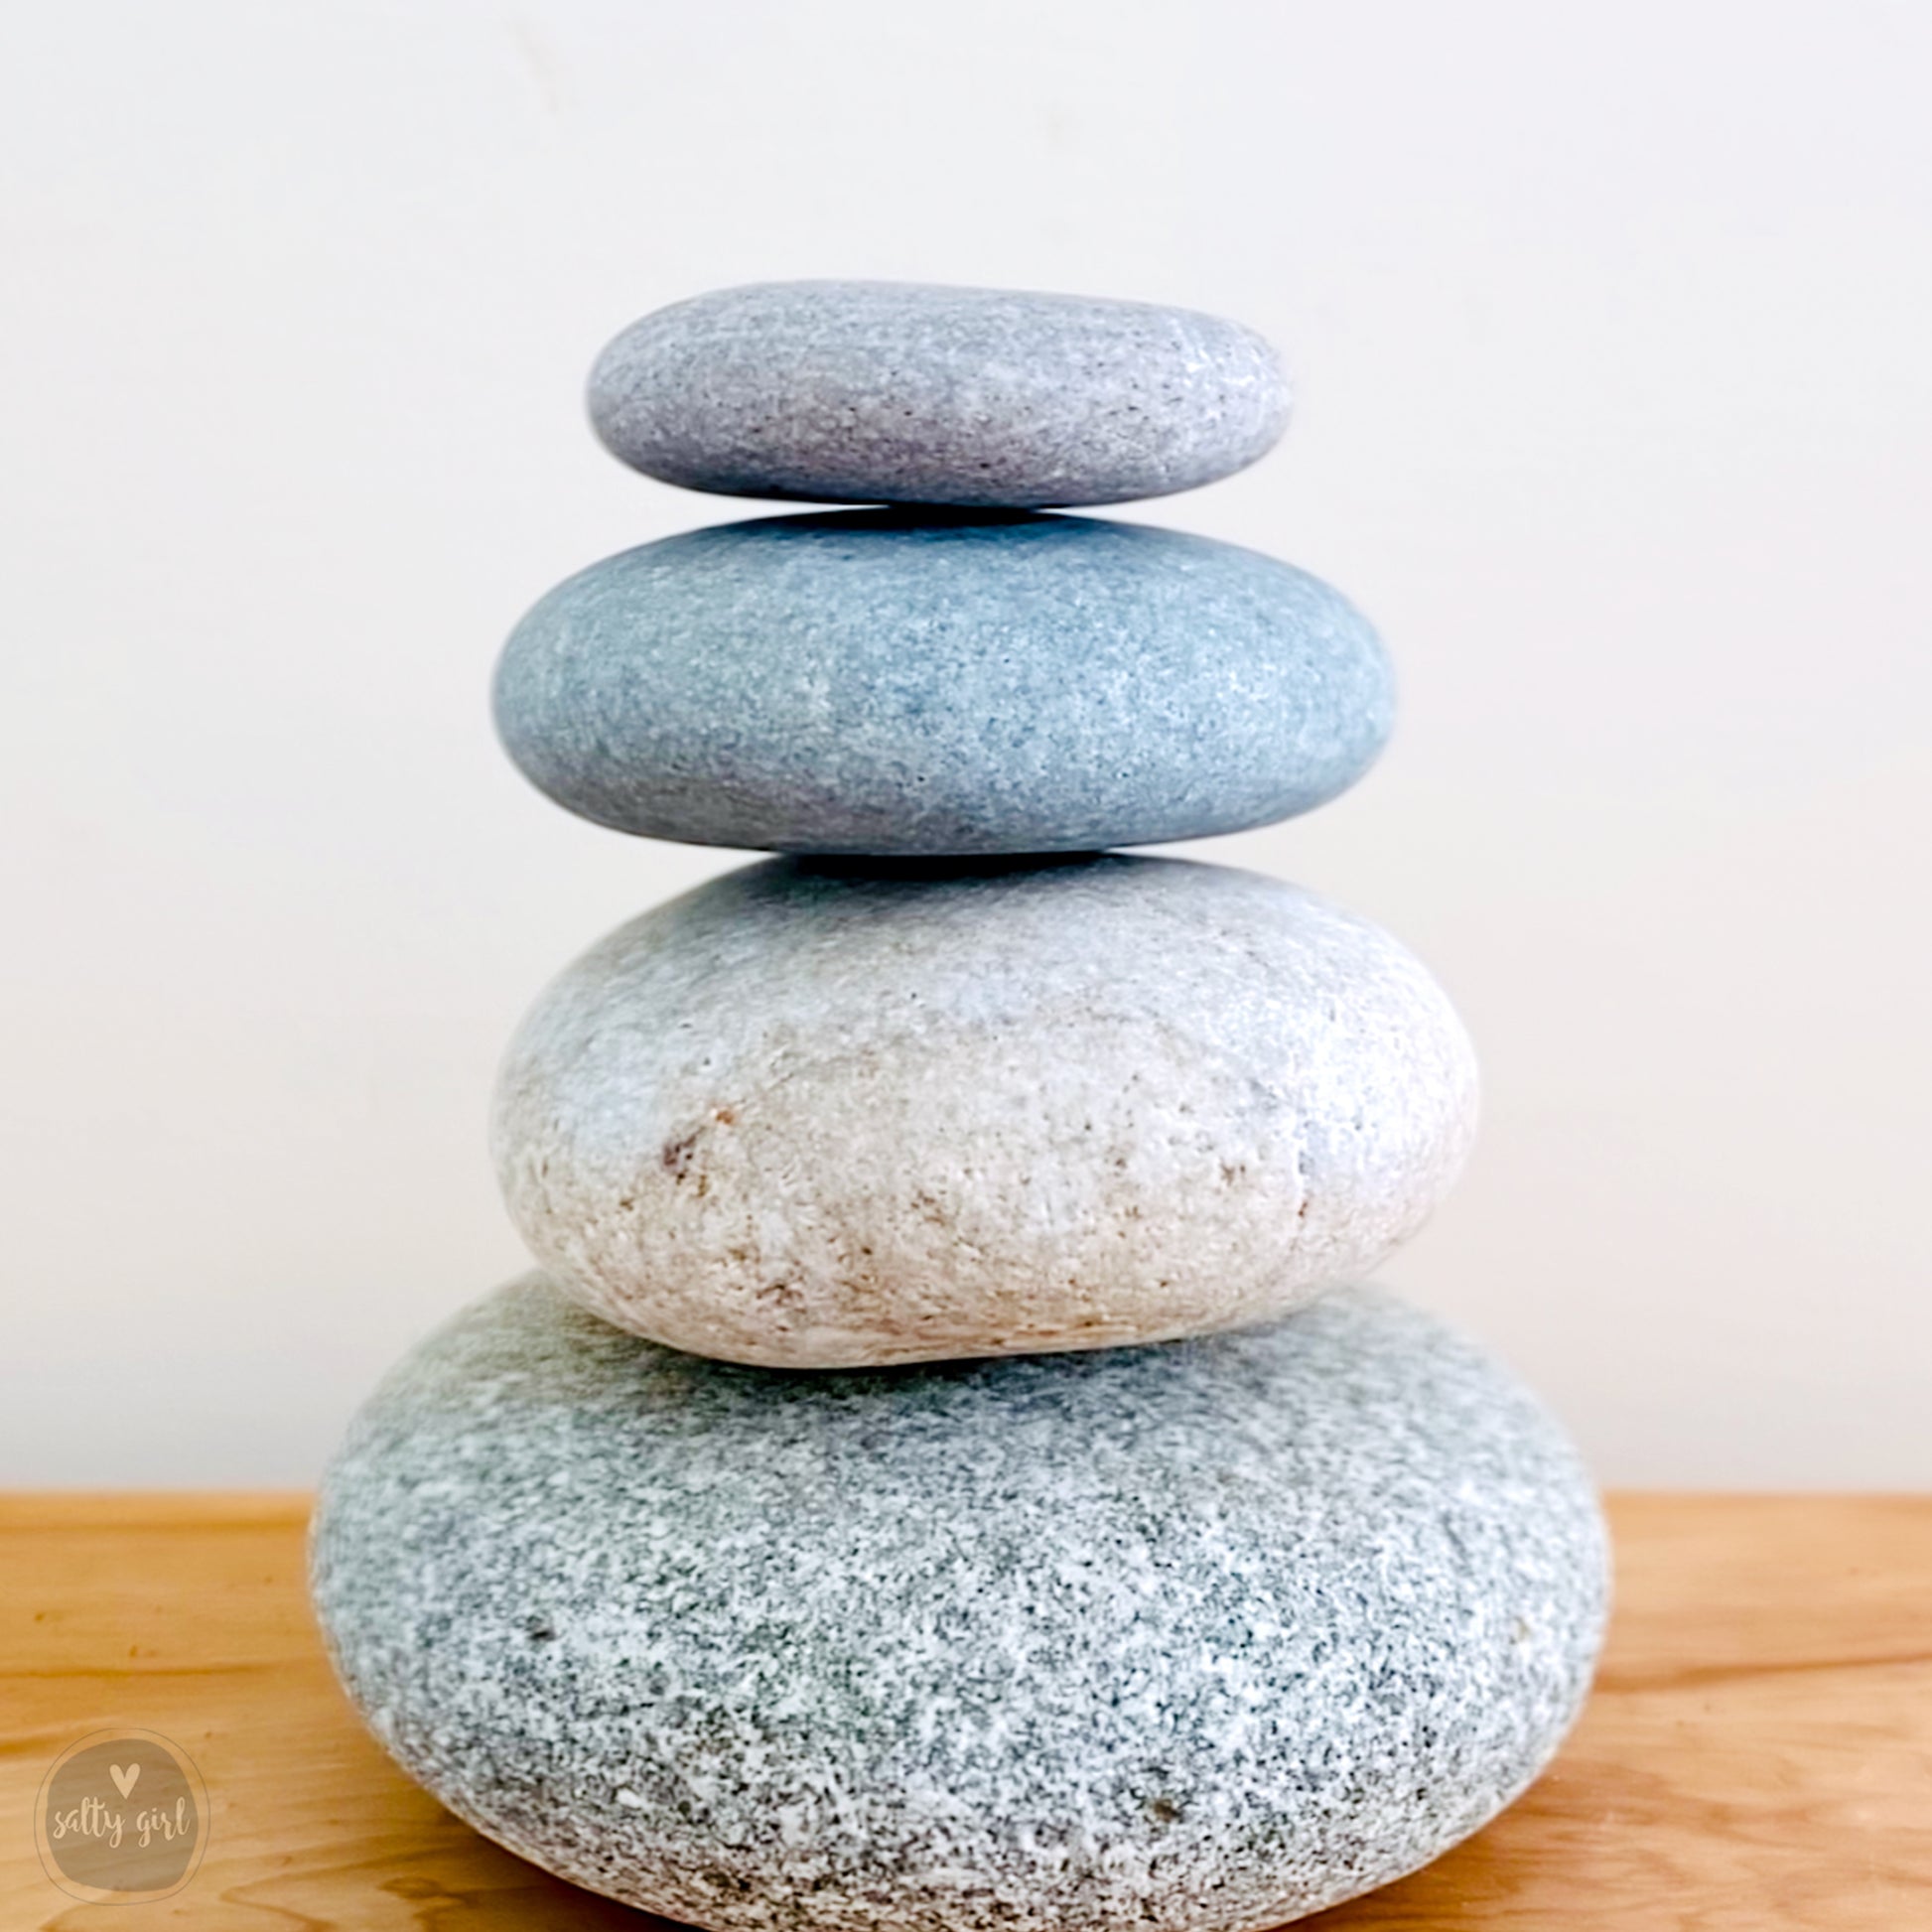 What Is The Spiritual Meaning of Stacking Rocks?